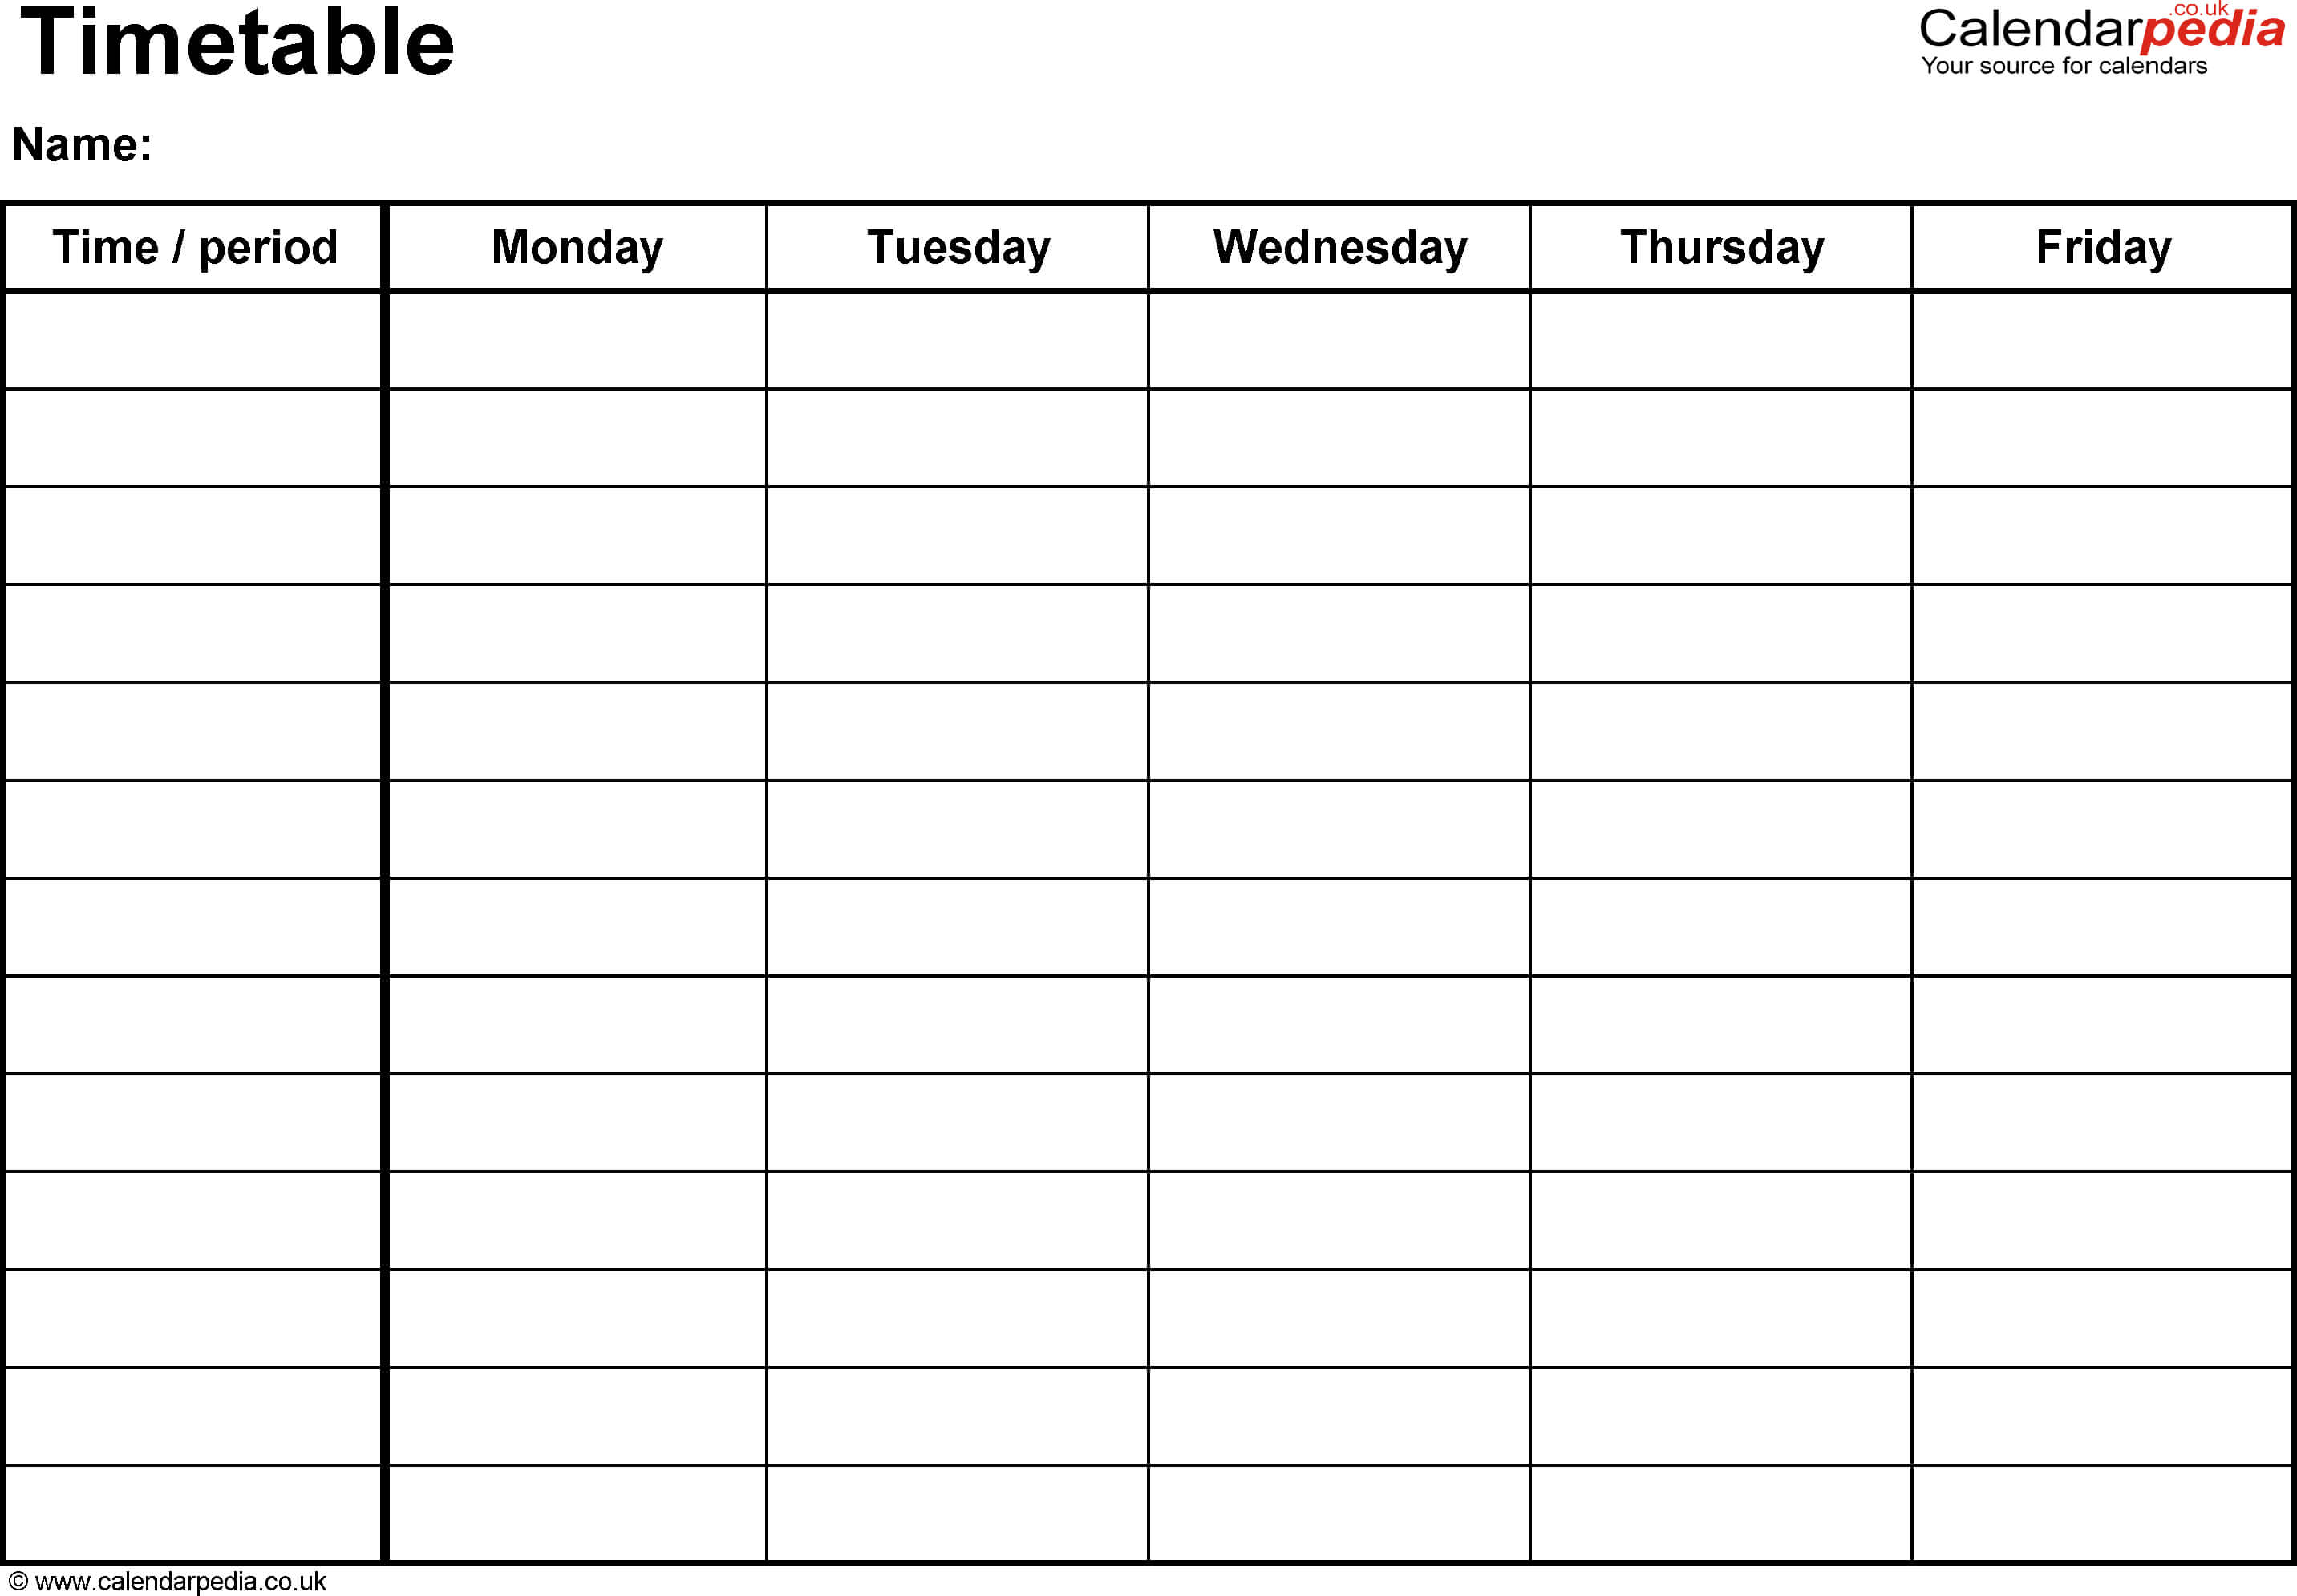 Excel Timetable Template 1: Landscape Format, A4, 1 Page For Blank Revision Timetable Template